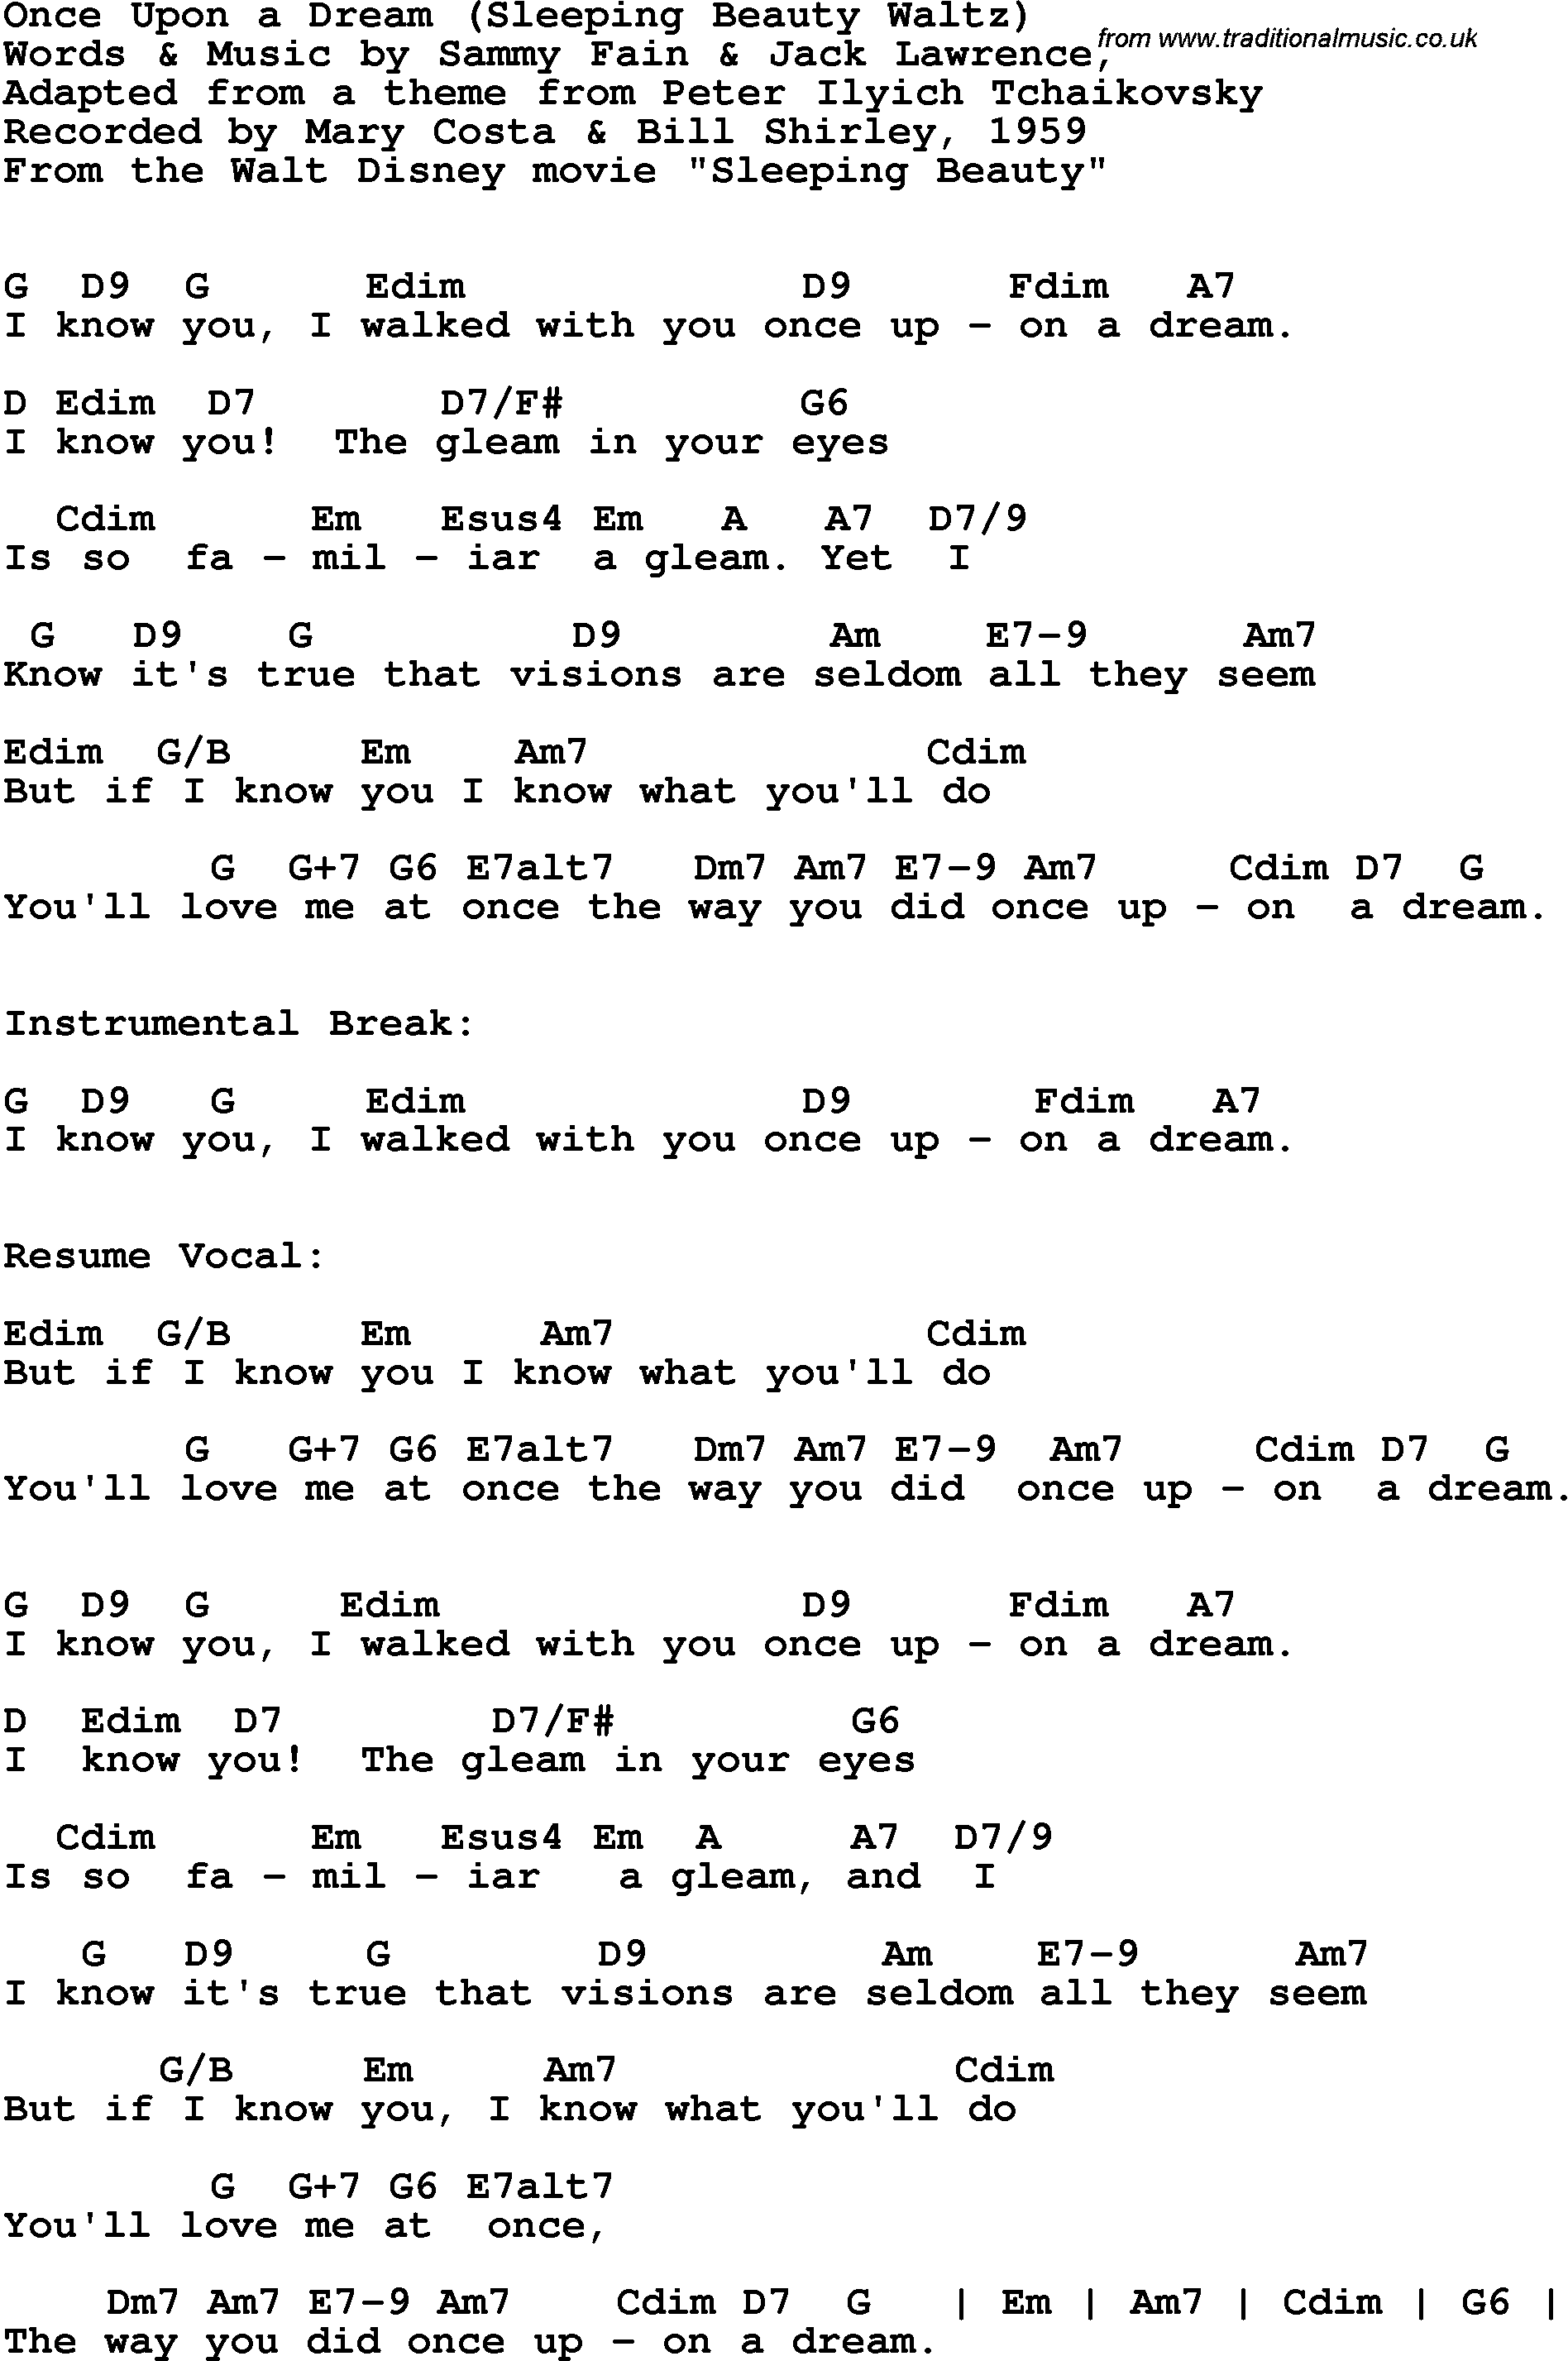 Song Lyrics with guitar chords for Once Upon A Dream - Mary Costa & Bill Shirley, 1959